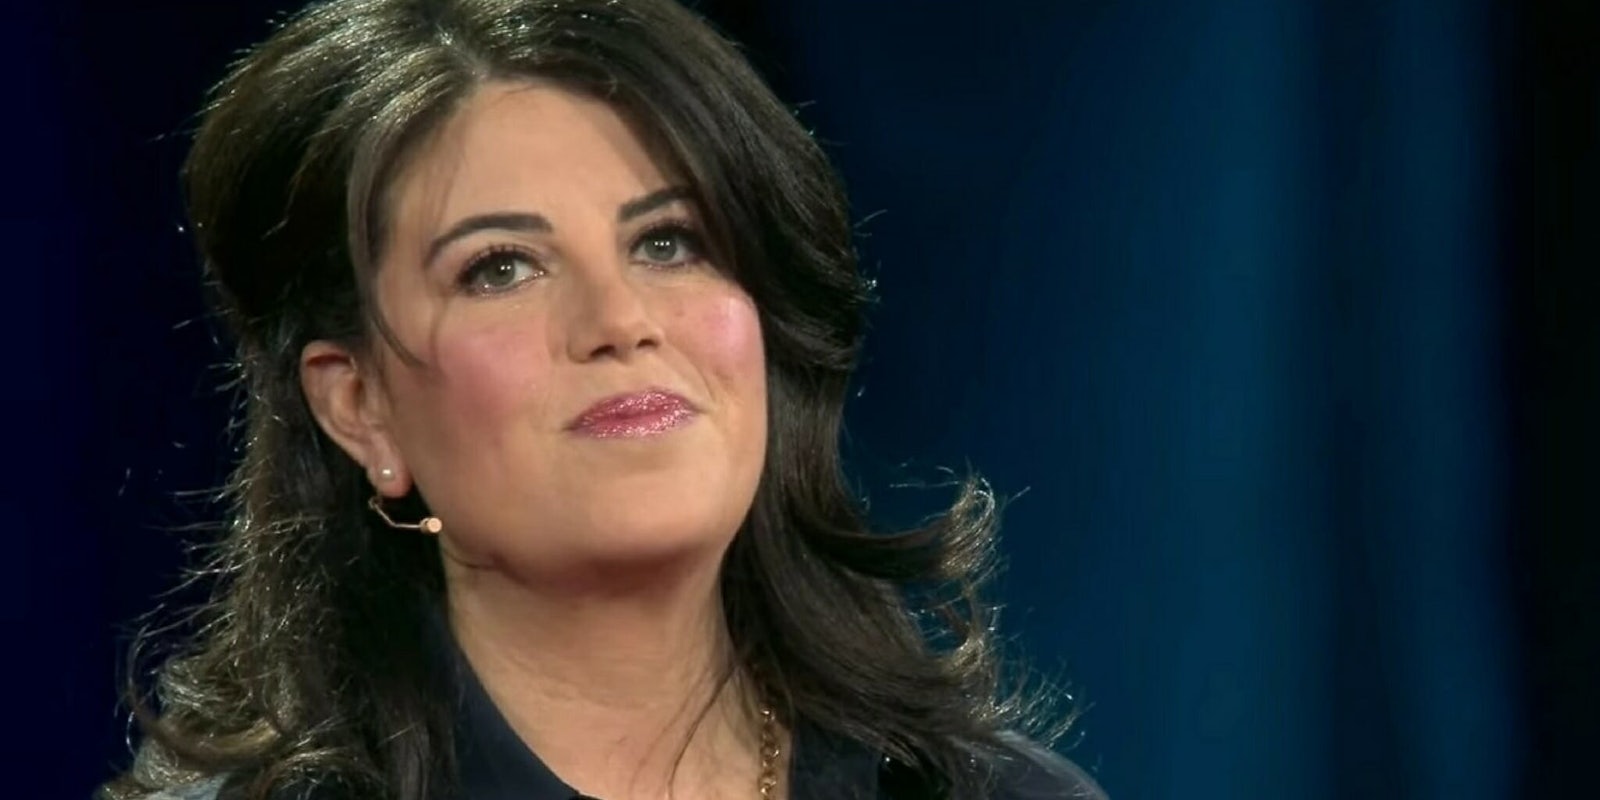 Monica Lewinsky delivers a TED Talk on cyberbullying in 2015.